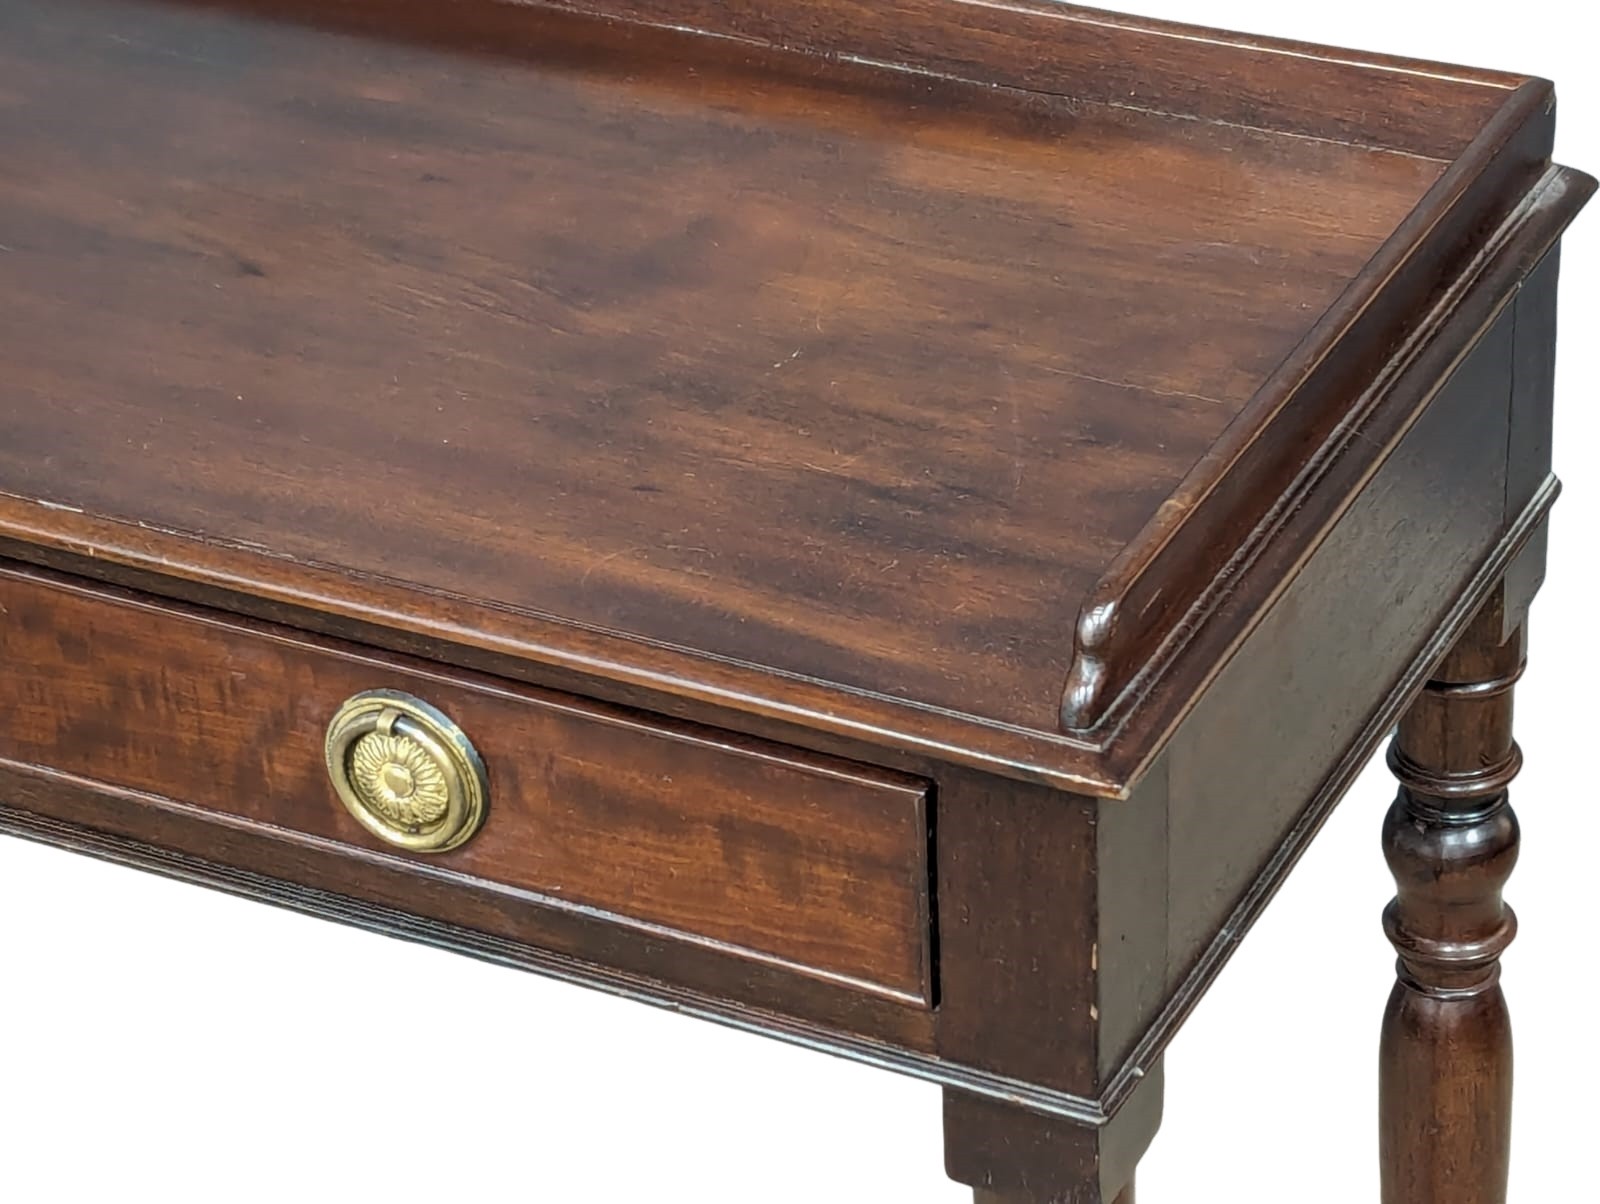 A Victorian mahogany gallery back hall table with 2 drawers with turned tapering legs. 79.5x38x78cm - Image 6 of 6